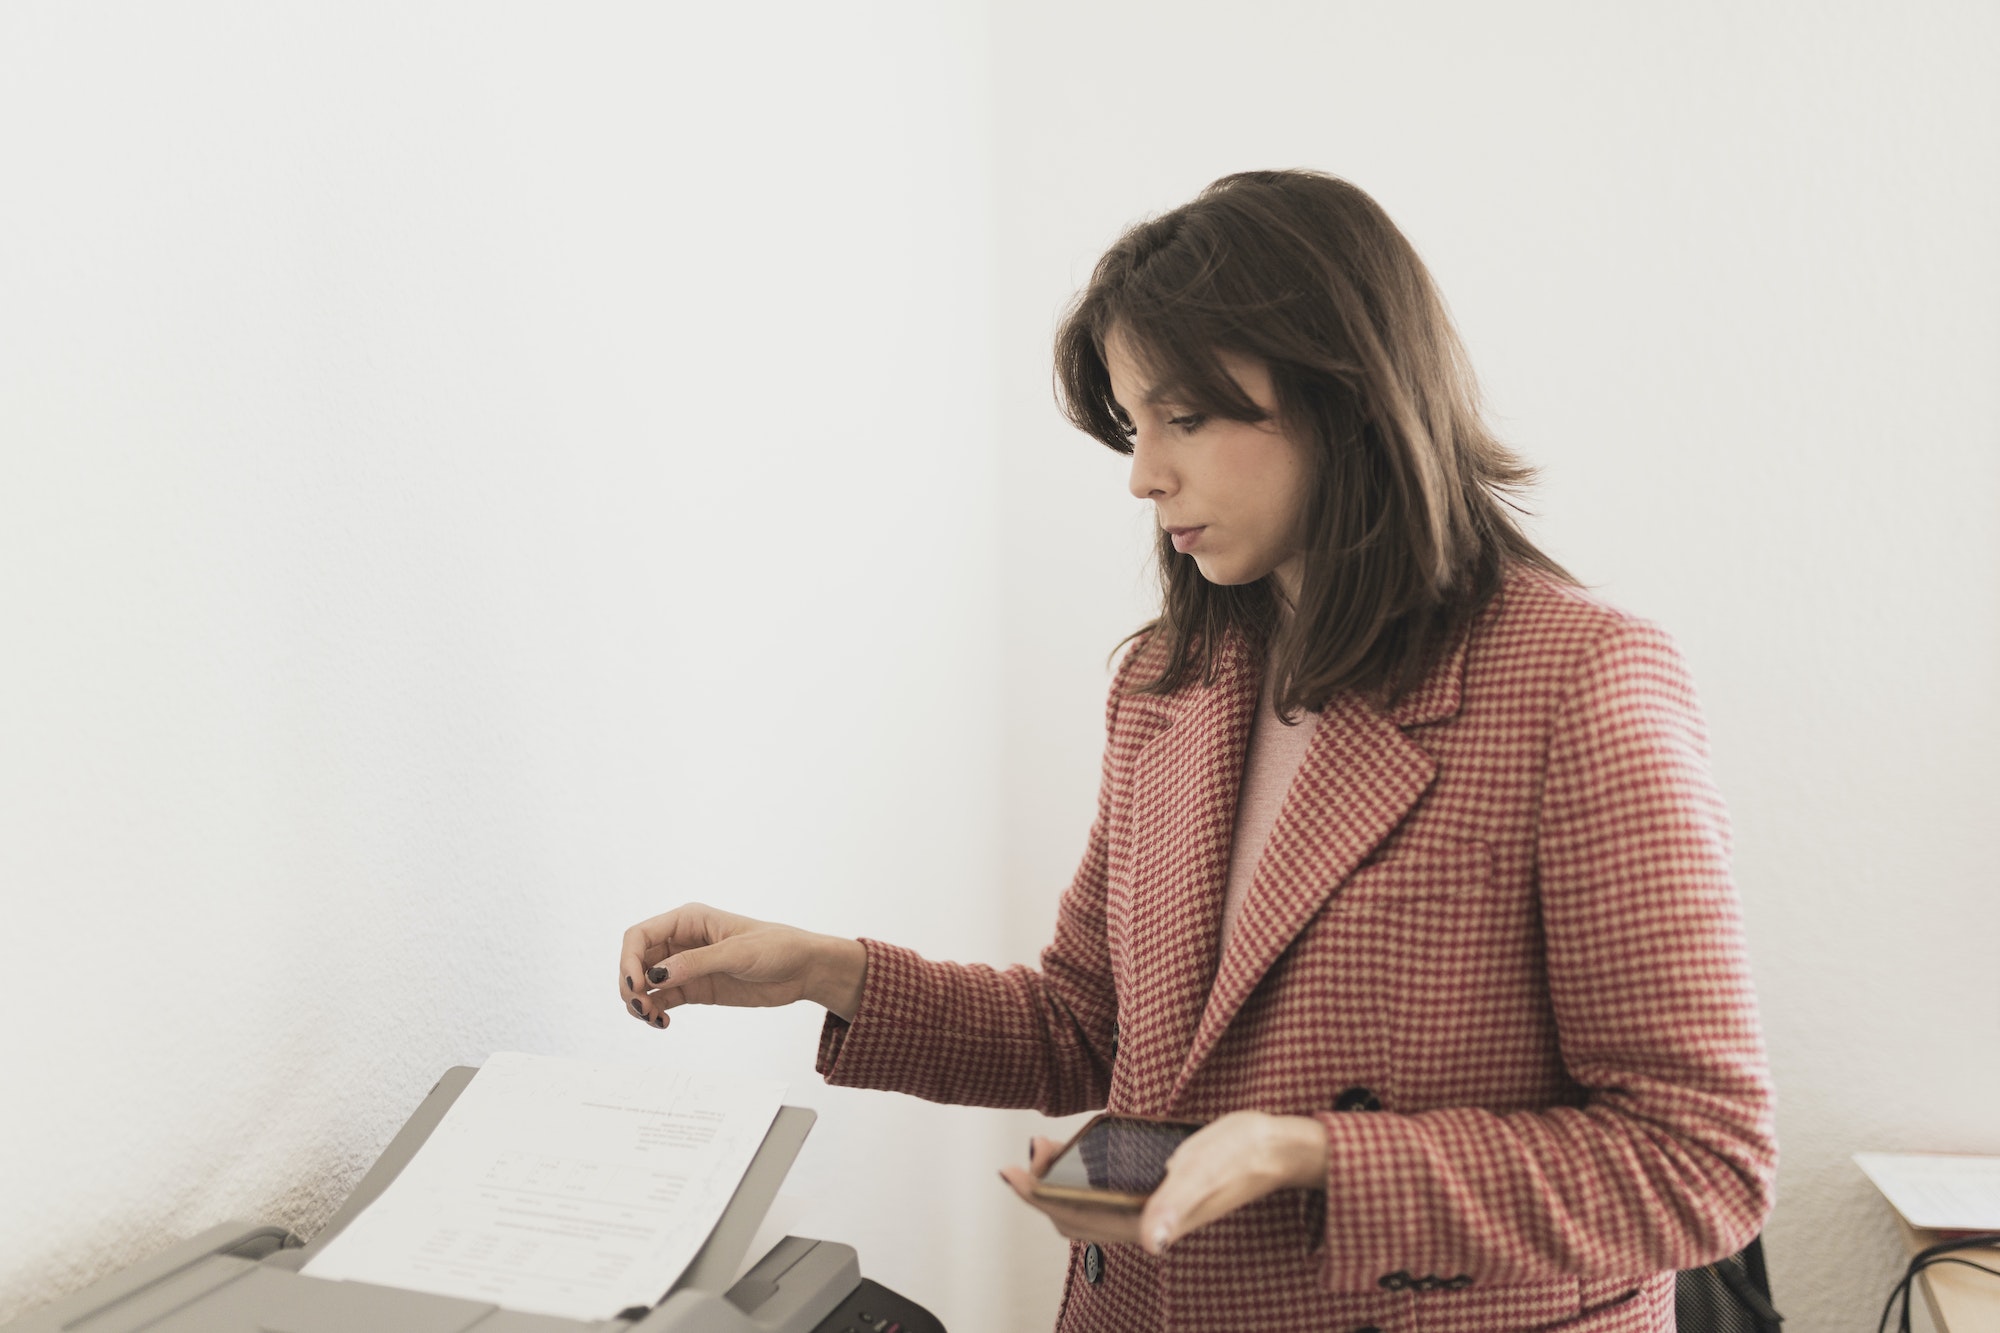 Serious woman with smartphone near documents on printer